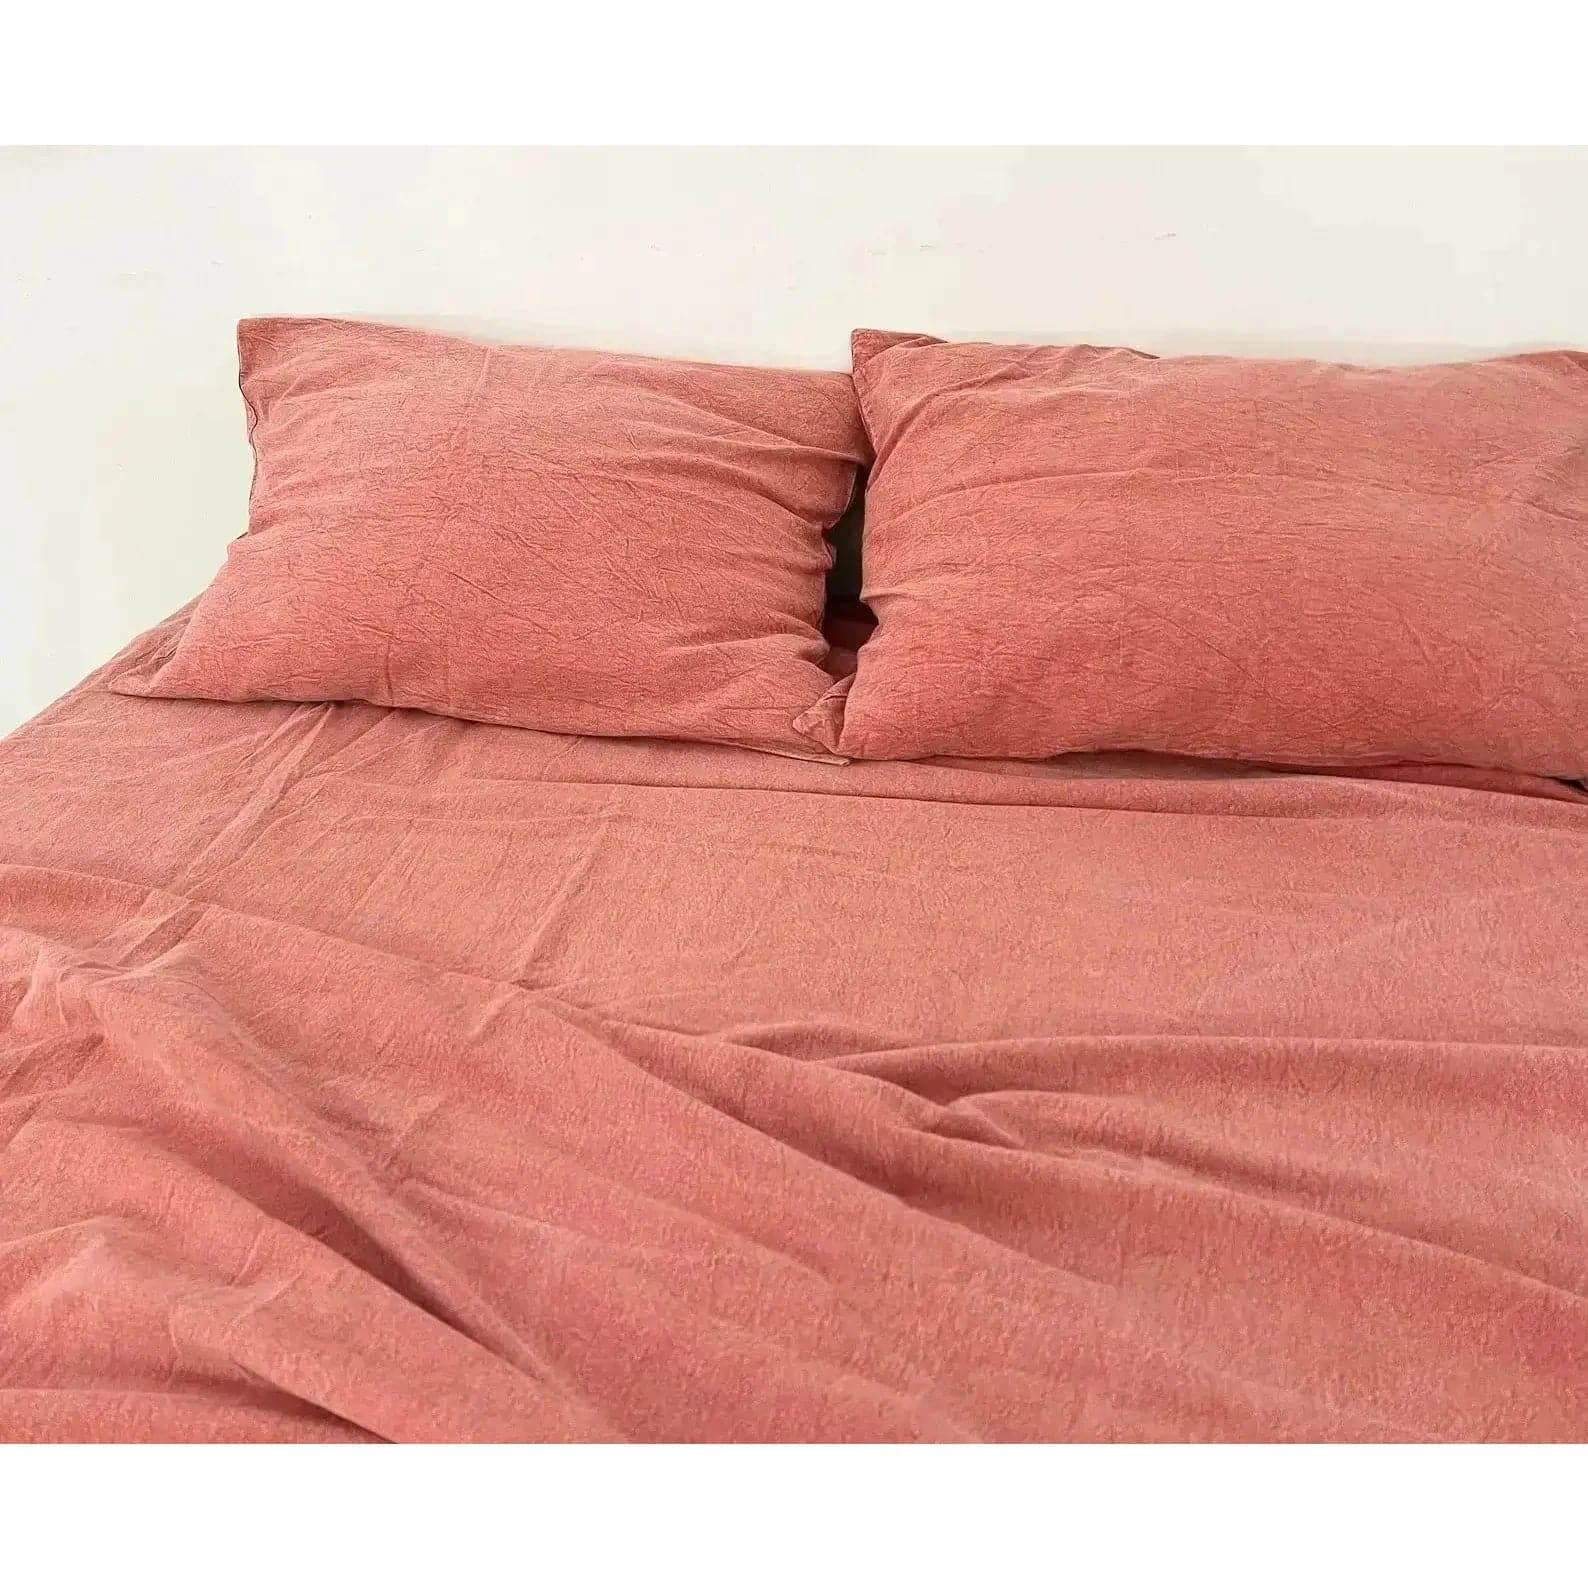 100% Pure Linen Duvet Set - Stone Washed Red Brick - MAIA HOMES